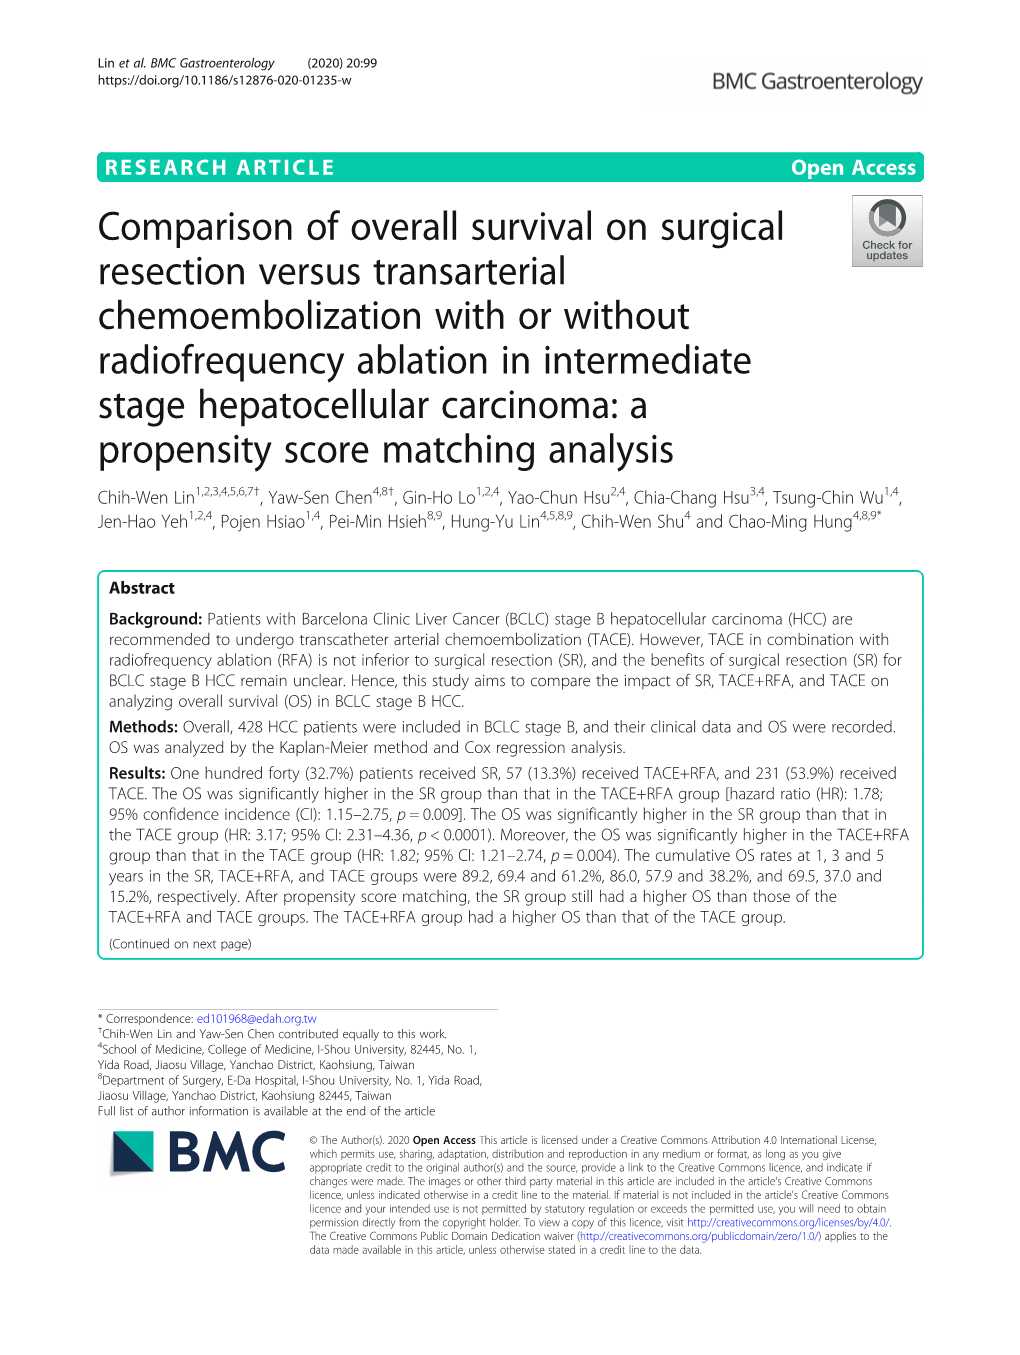 Comparison of Overall Survival on Surgical Resection Versus Transarterial Chemoembolization with Or Without Radiofrequency Ablat